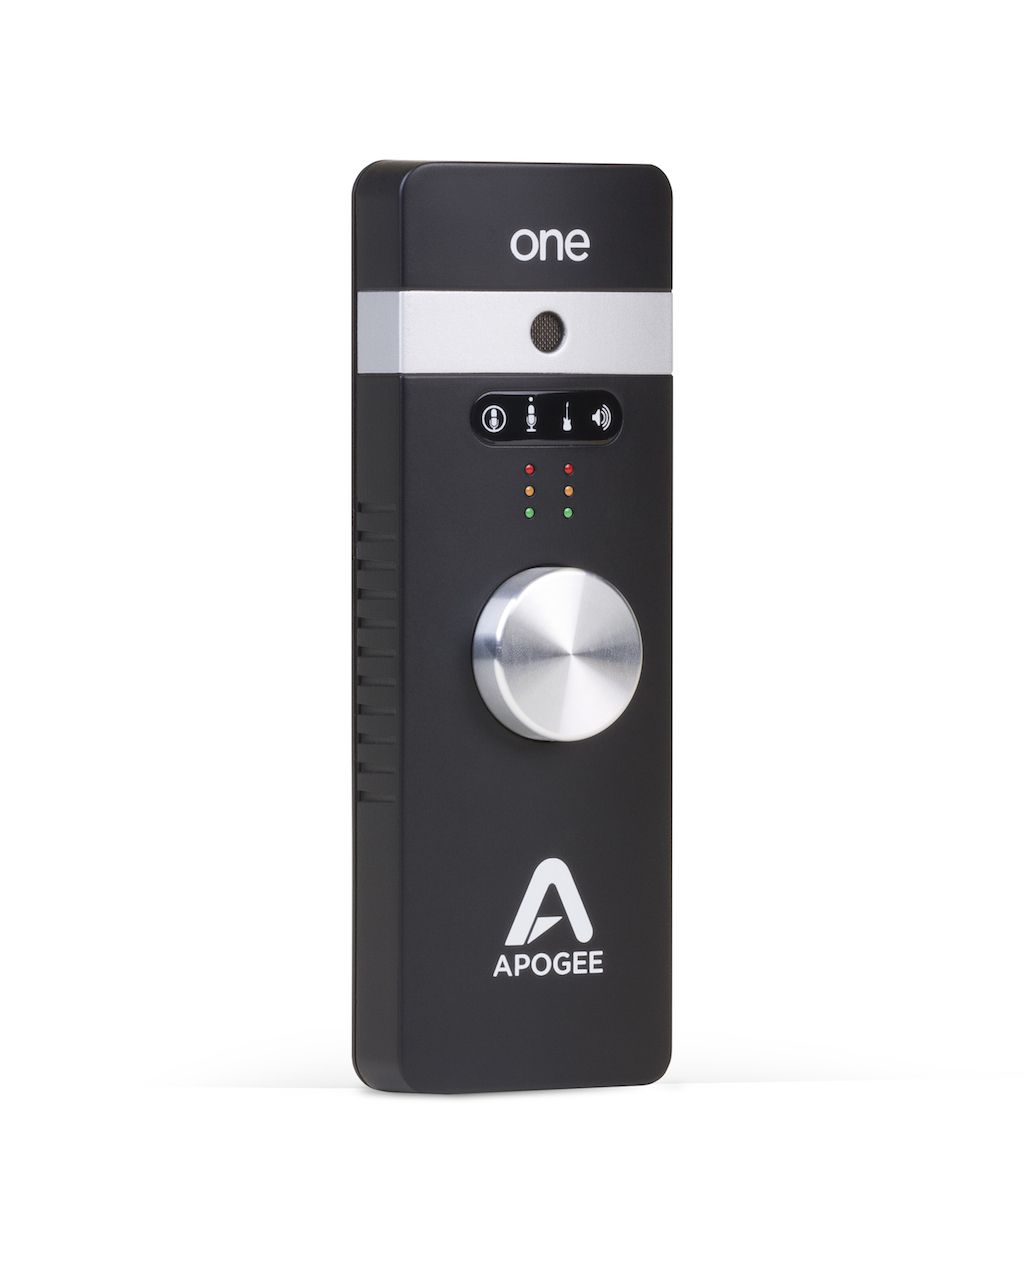 Apogee One - The Apogee One is not only a high-quality audio interface, it doubles as a microphone as well!